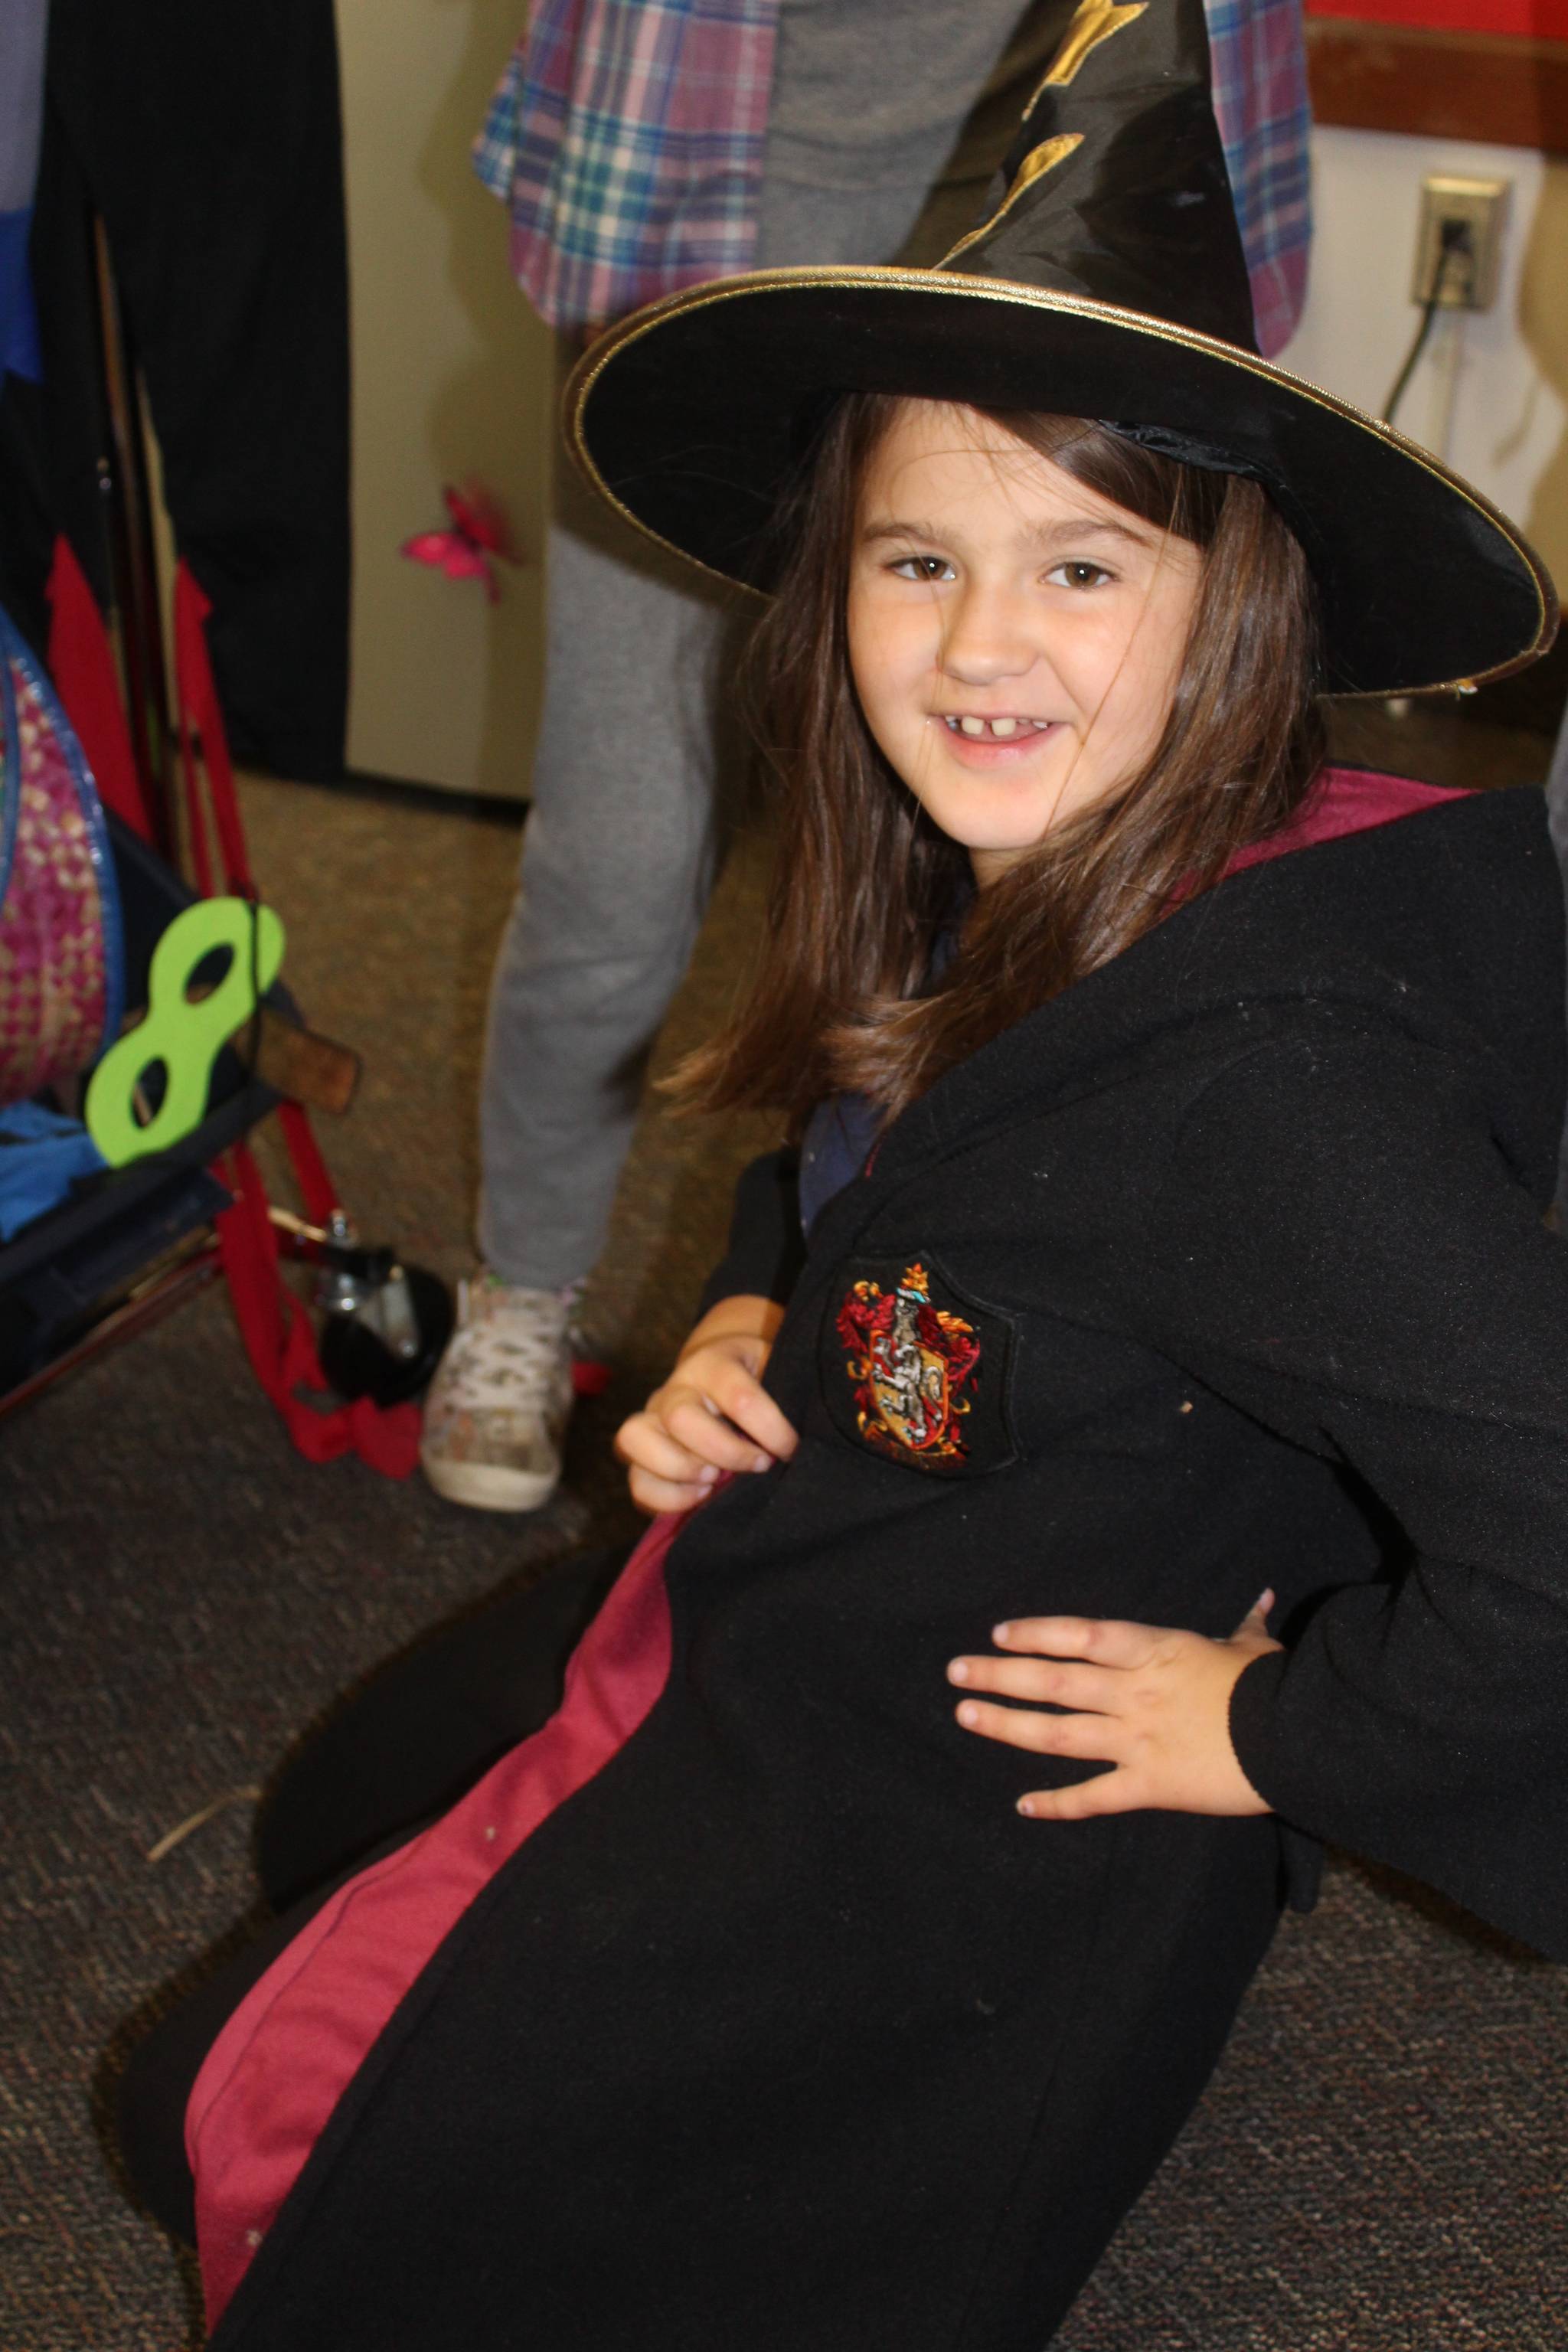 June Murray tries on a witch costume at the Family Resource Center in Langley, home to the free Halloween Costume Swap by Readiness to Learn. Photo by Wendy Leigh / South Whidbey Record